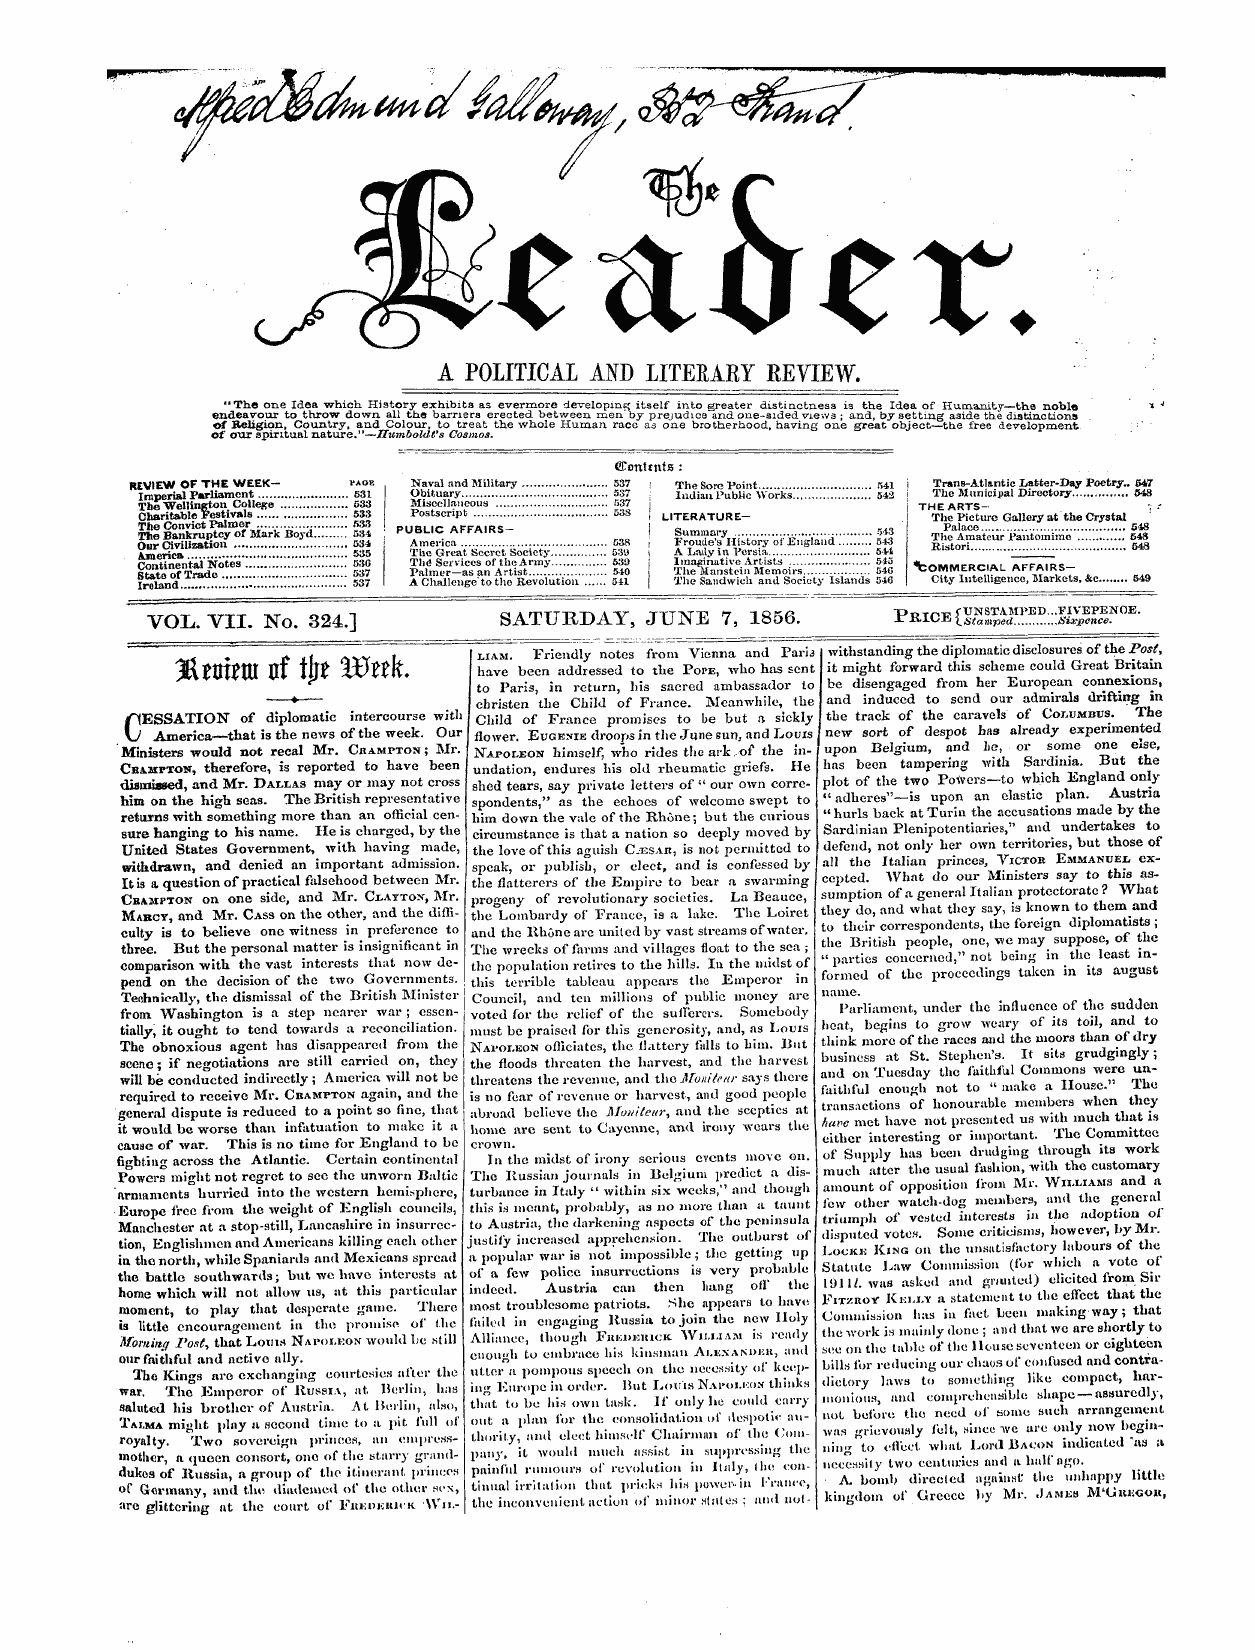 Leader (1850-1860): jS F Y, 2nd edition - Contents :